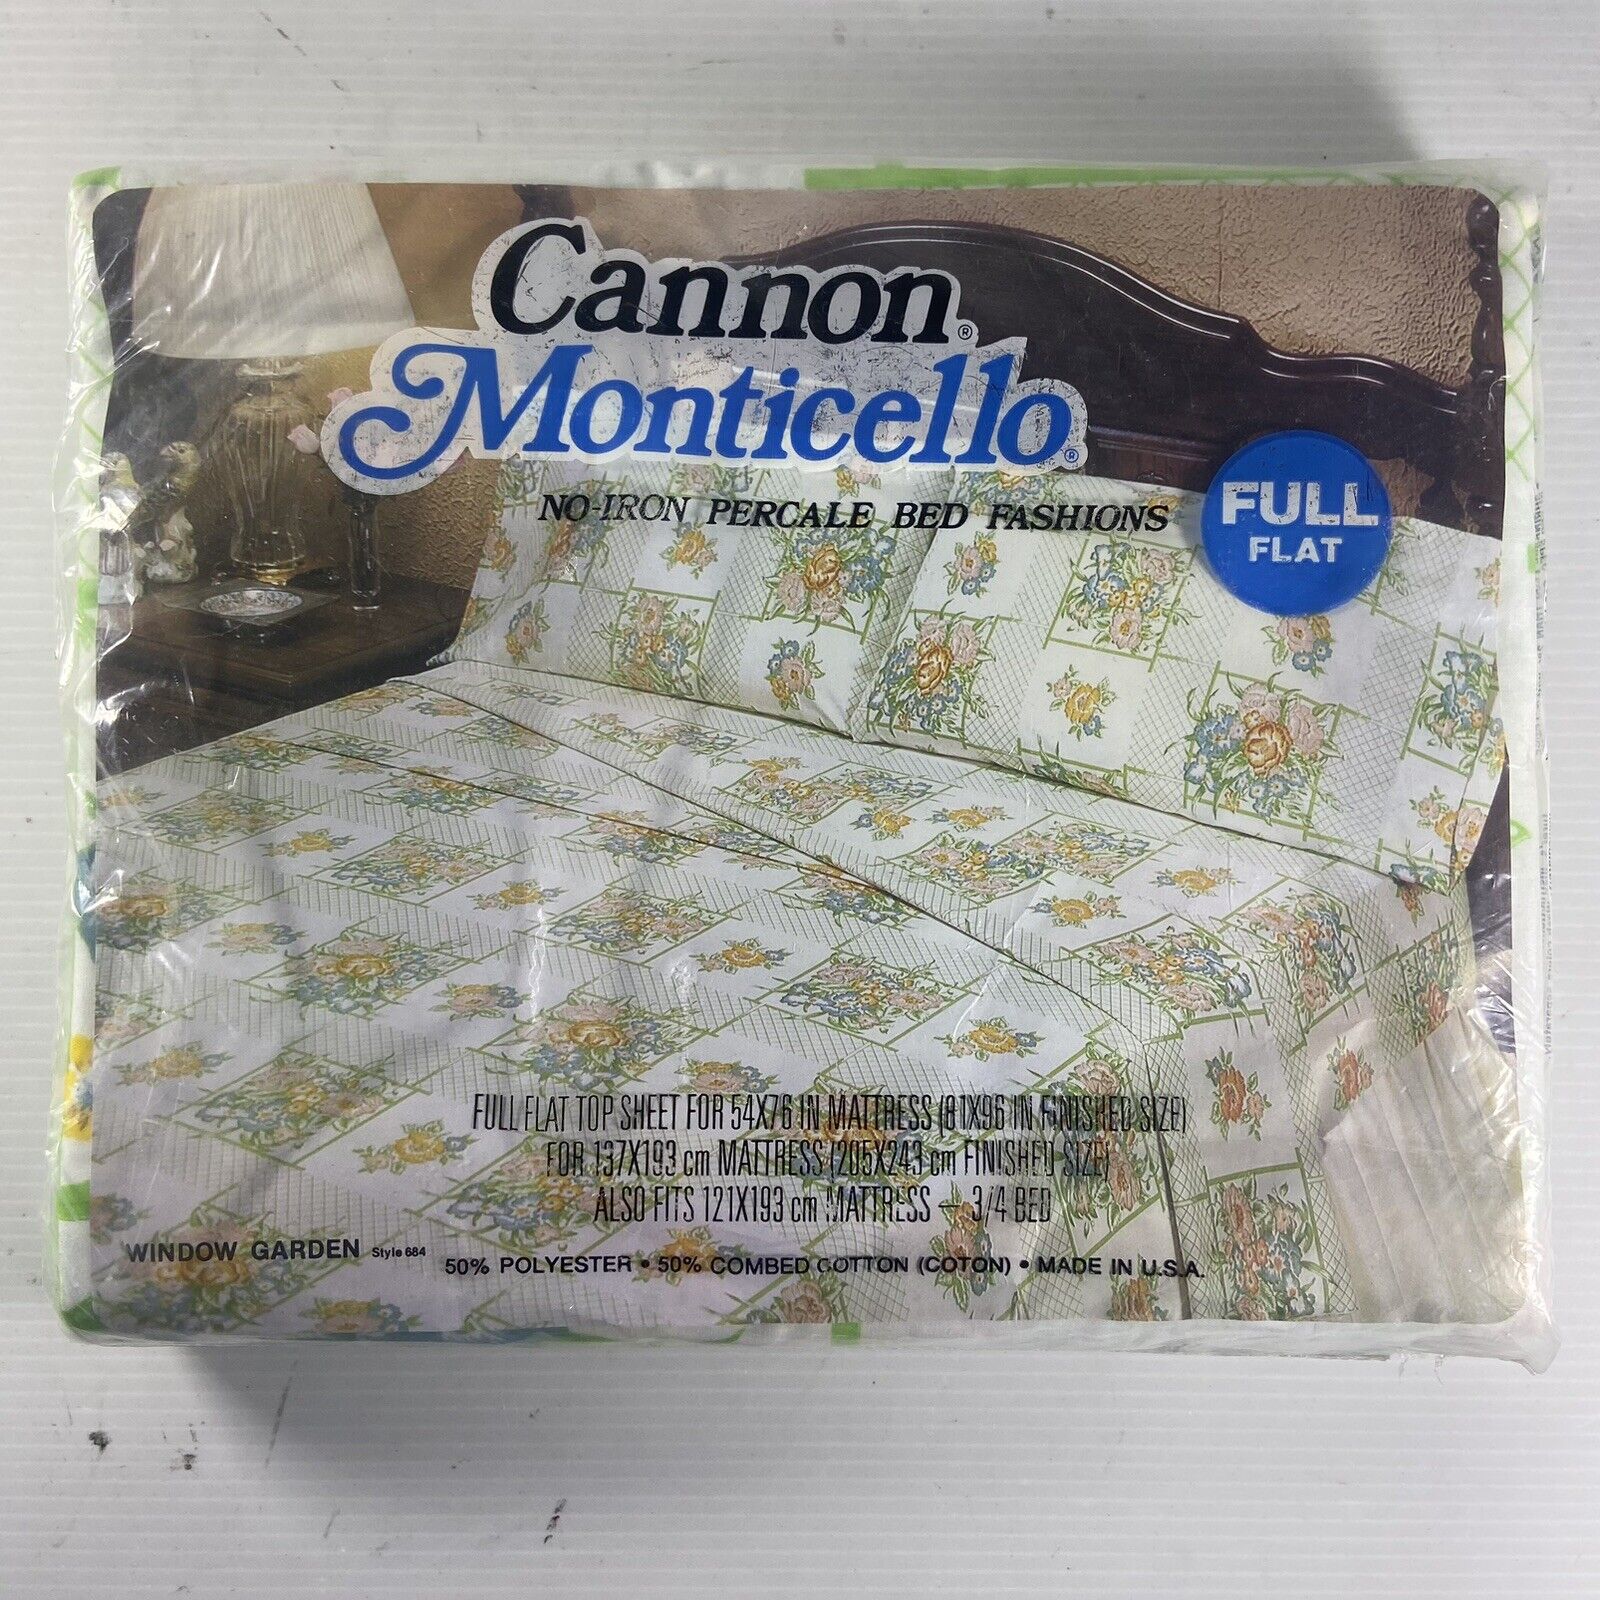 NIP VTG MCM Cannon Monticello Cotton White Floral Full Flat Bed Sheet 54x76